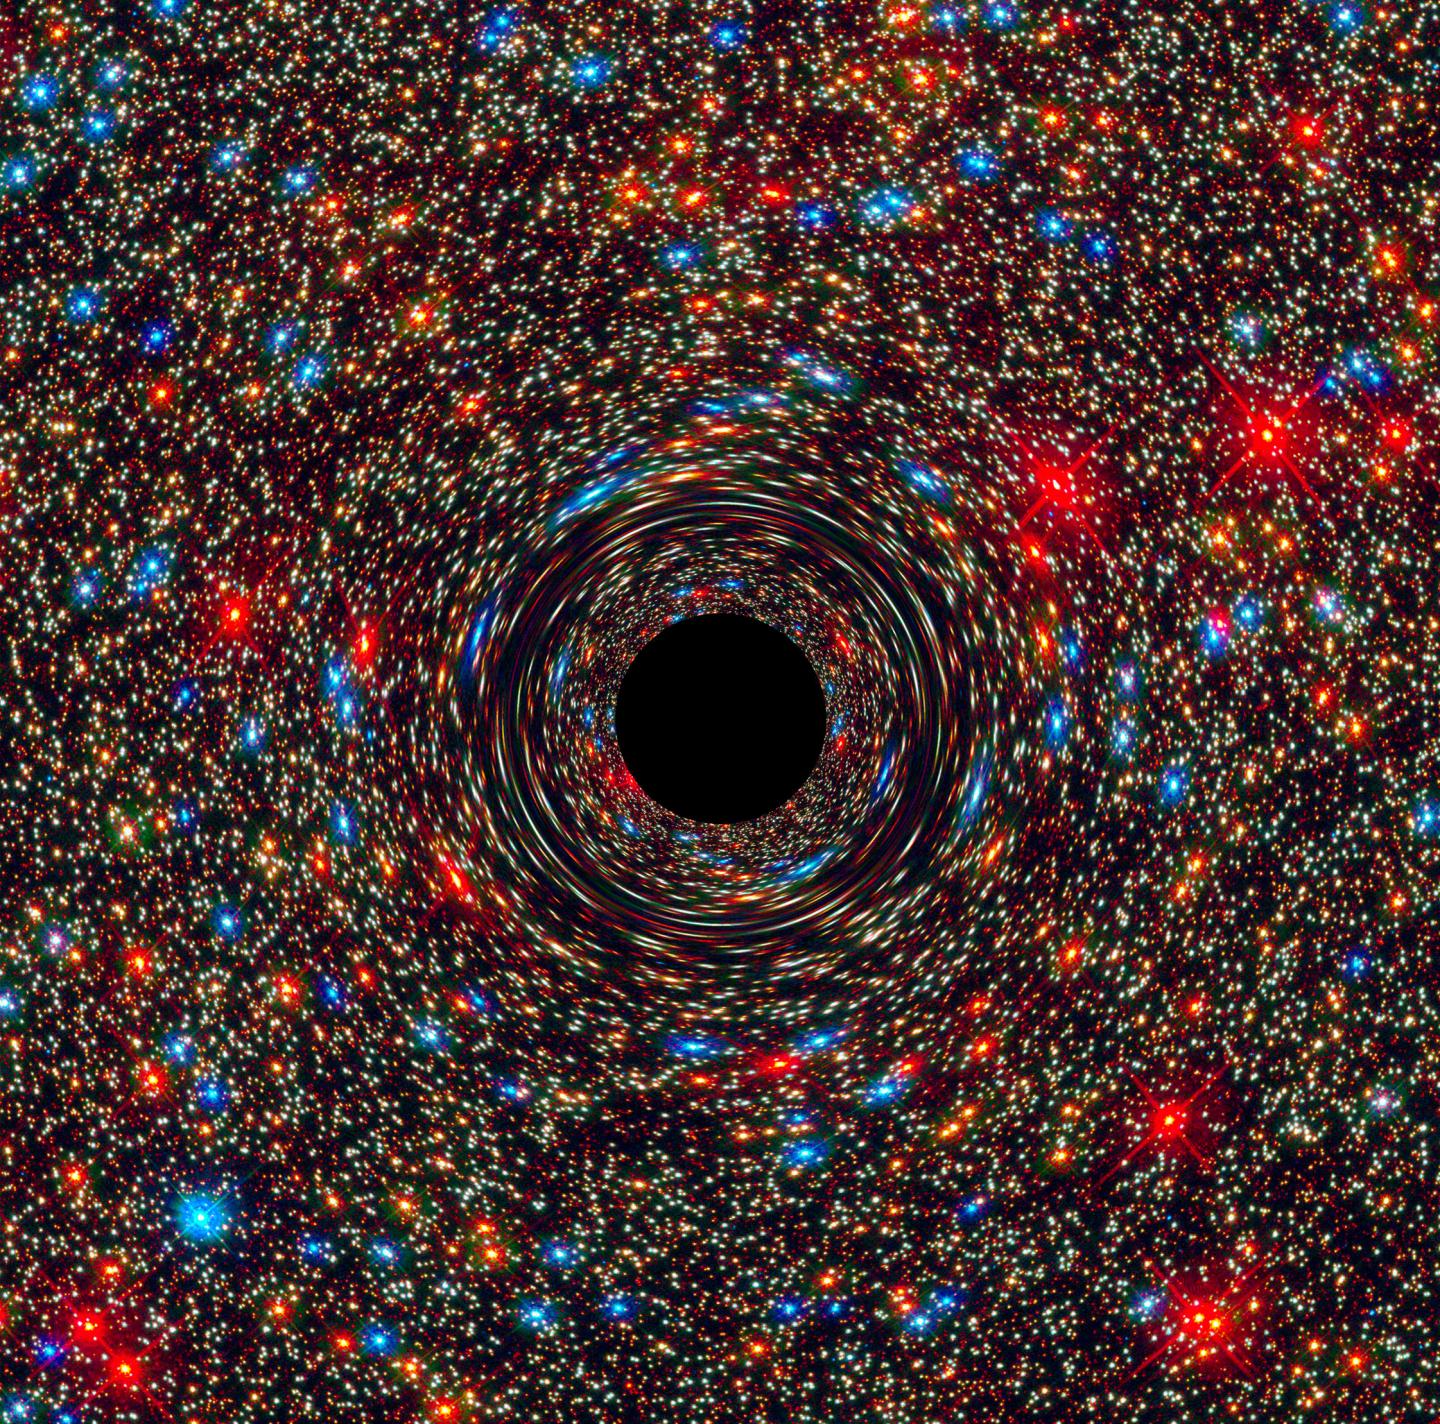 A Supermassive Black Hole at the Core of a Galaxy